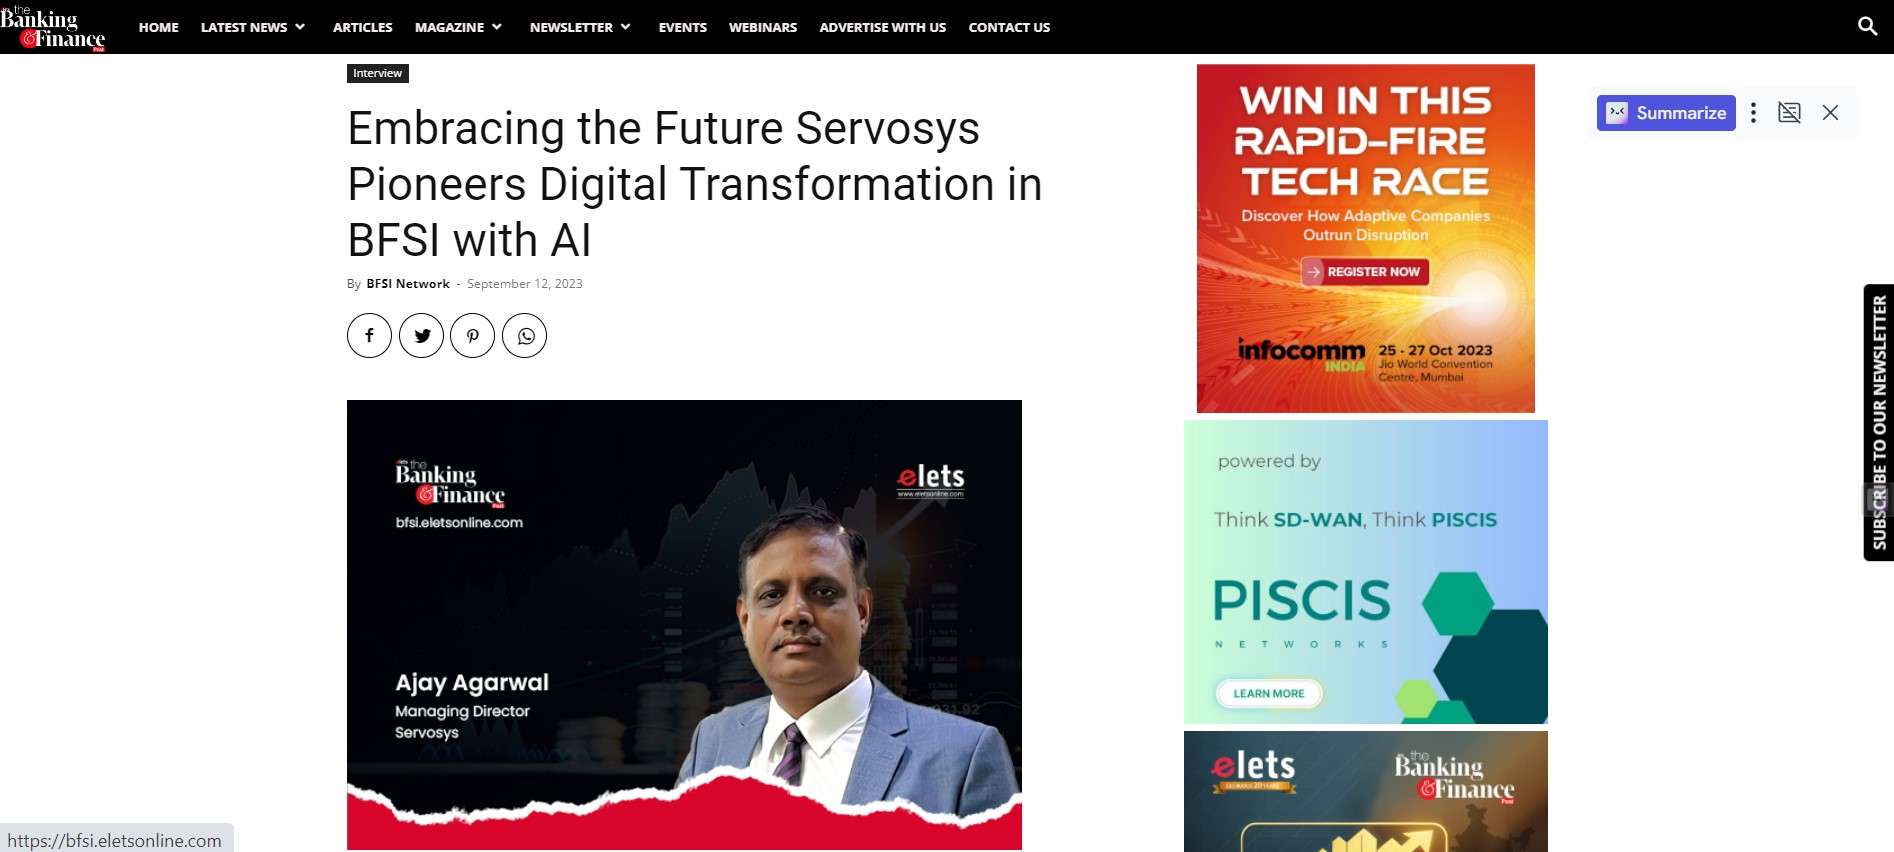 Embracing the Future Servosys Pioneers Digital Transformation in BFSI with AI